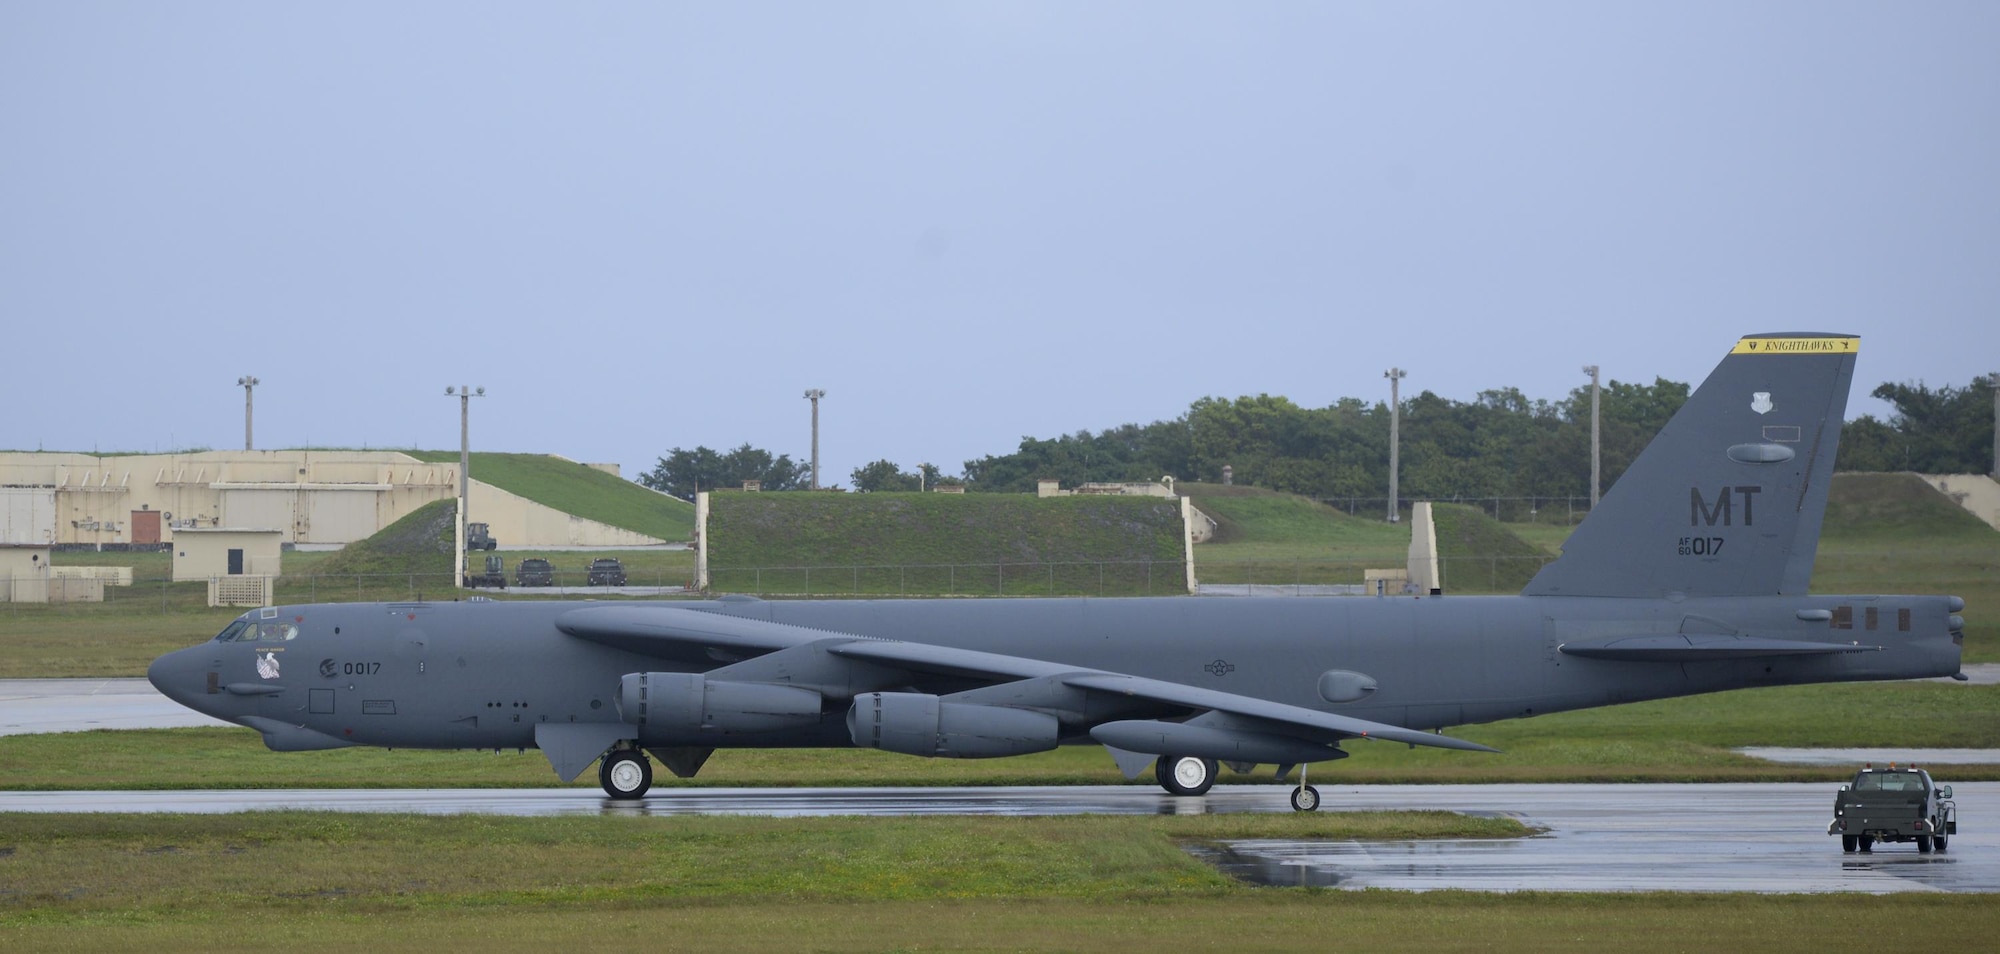 A U.S. Air Force B-52 Stratofortress taxis on a runway at Andersen Air Force Base, Guam, Dec. 17, 2016. Three B-52s from Minot Air Force Base, North Dakota, deployed to Andersen for a short-term deployment  to conduct local training sorties in the U.S. Pacific Command’s area of re-sponsibility. (U.S. Air Force photo by Staff Sgt. Benjamin Gonsier/Released)